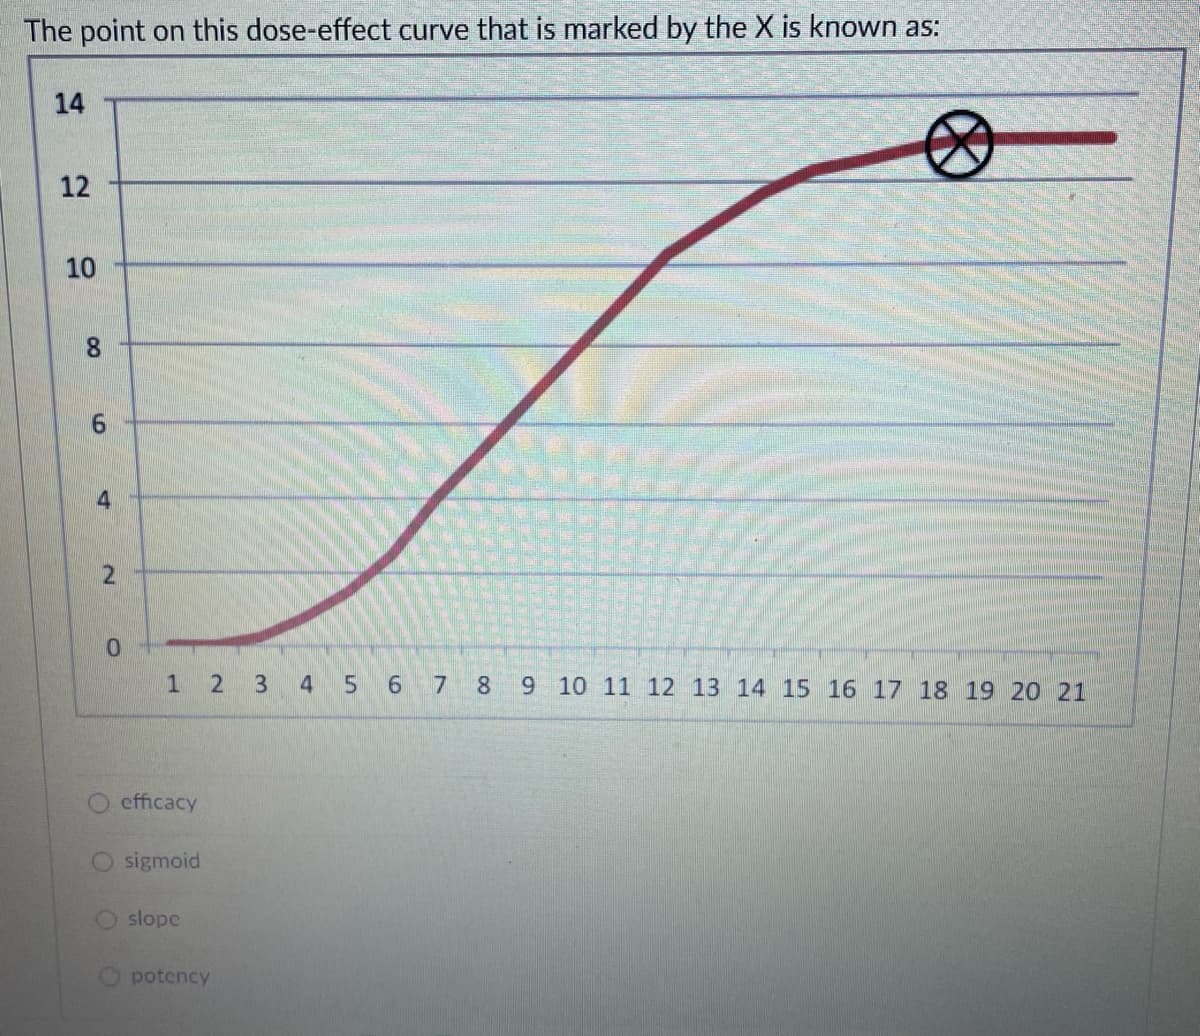 The point on this dose-effect curve that is marked by the X is known as:
14
12
10
8.
9.
4
2
1
2 3 4 5 6 7 8
9 10 11 12 13 14 15 16 17 18 19 20 21
O efficacy
O sigmoid
slope
potency
